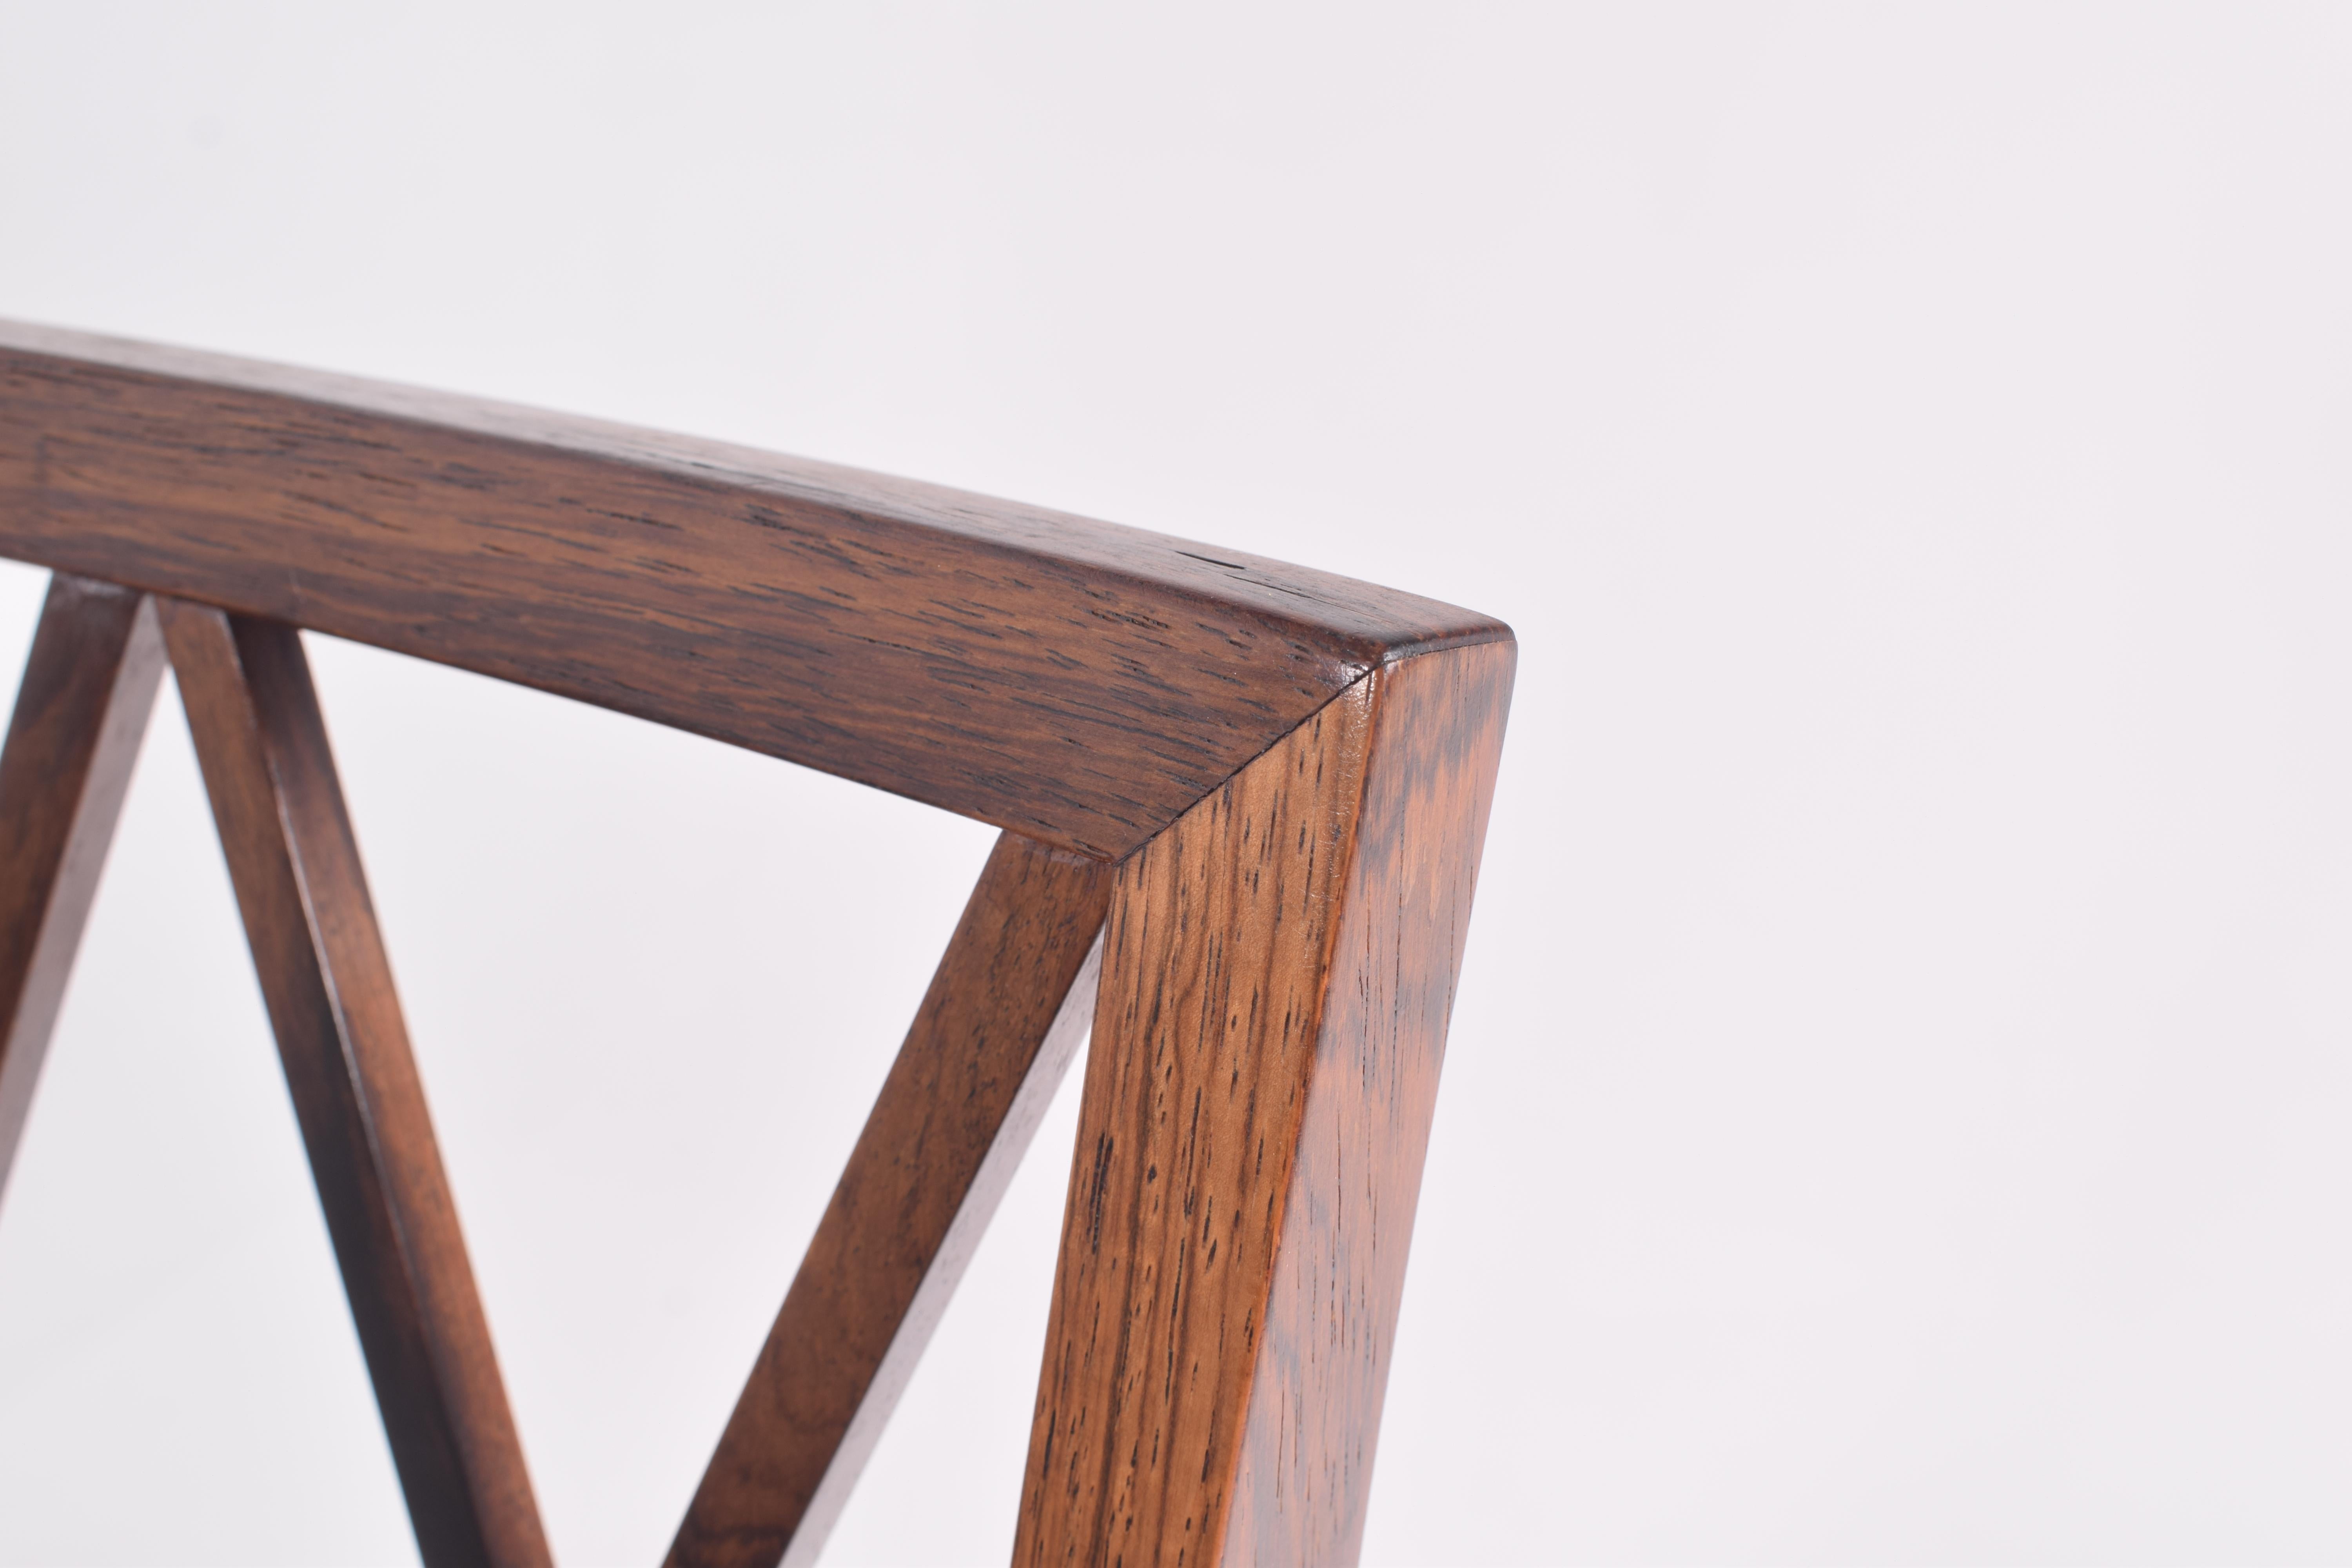 Ole Wanscher Slagelse Rosewood Dining Chairs 4